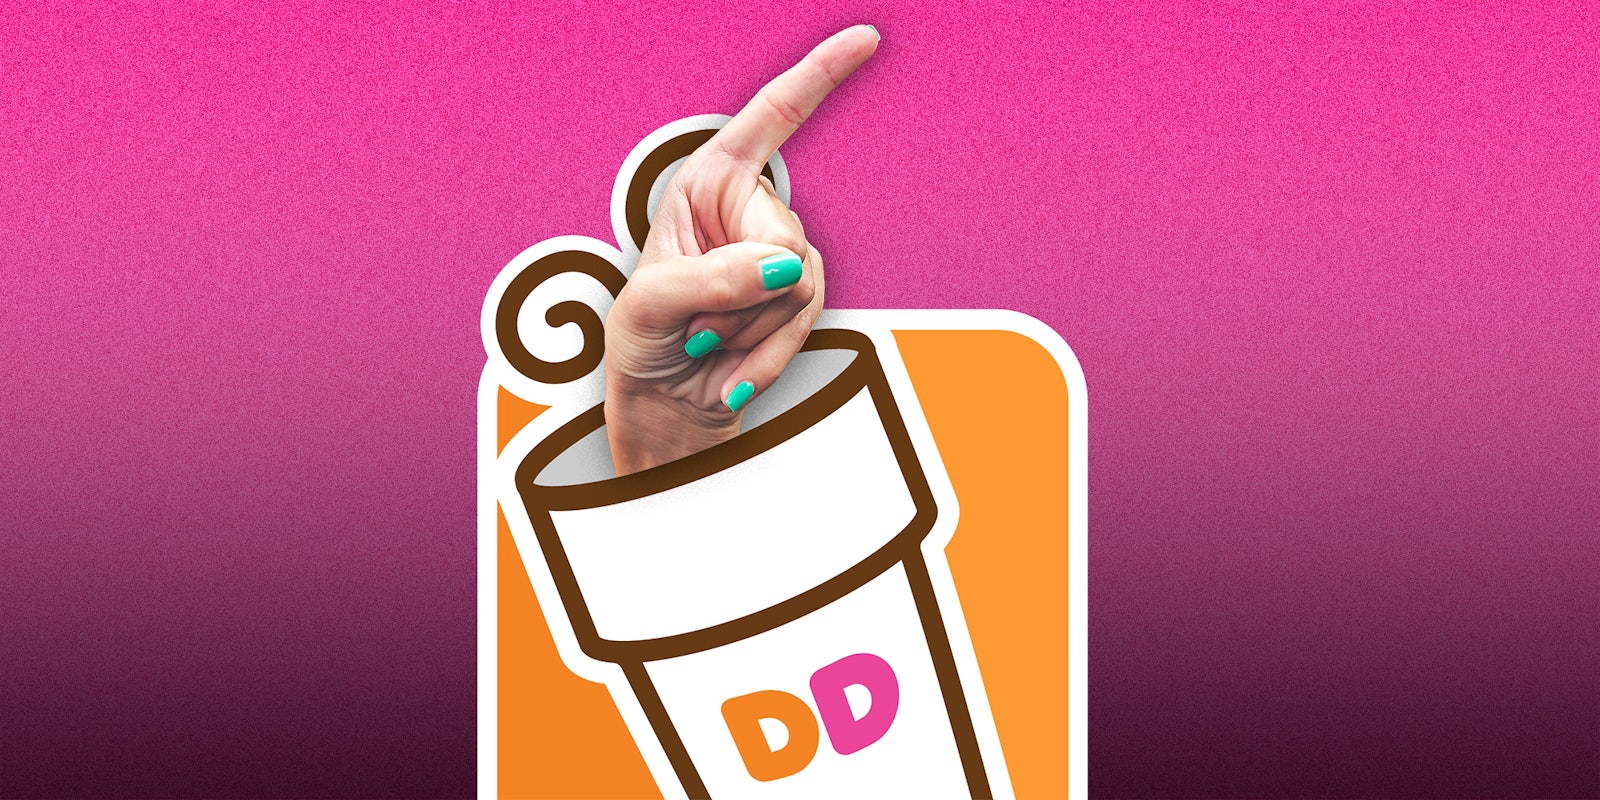 A hand coming out of the Dunkin' Donuts logo.